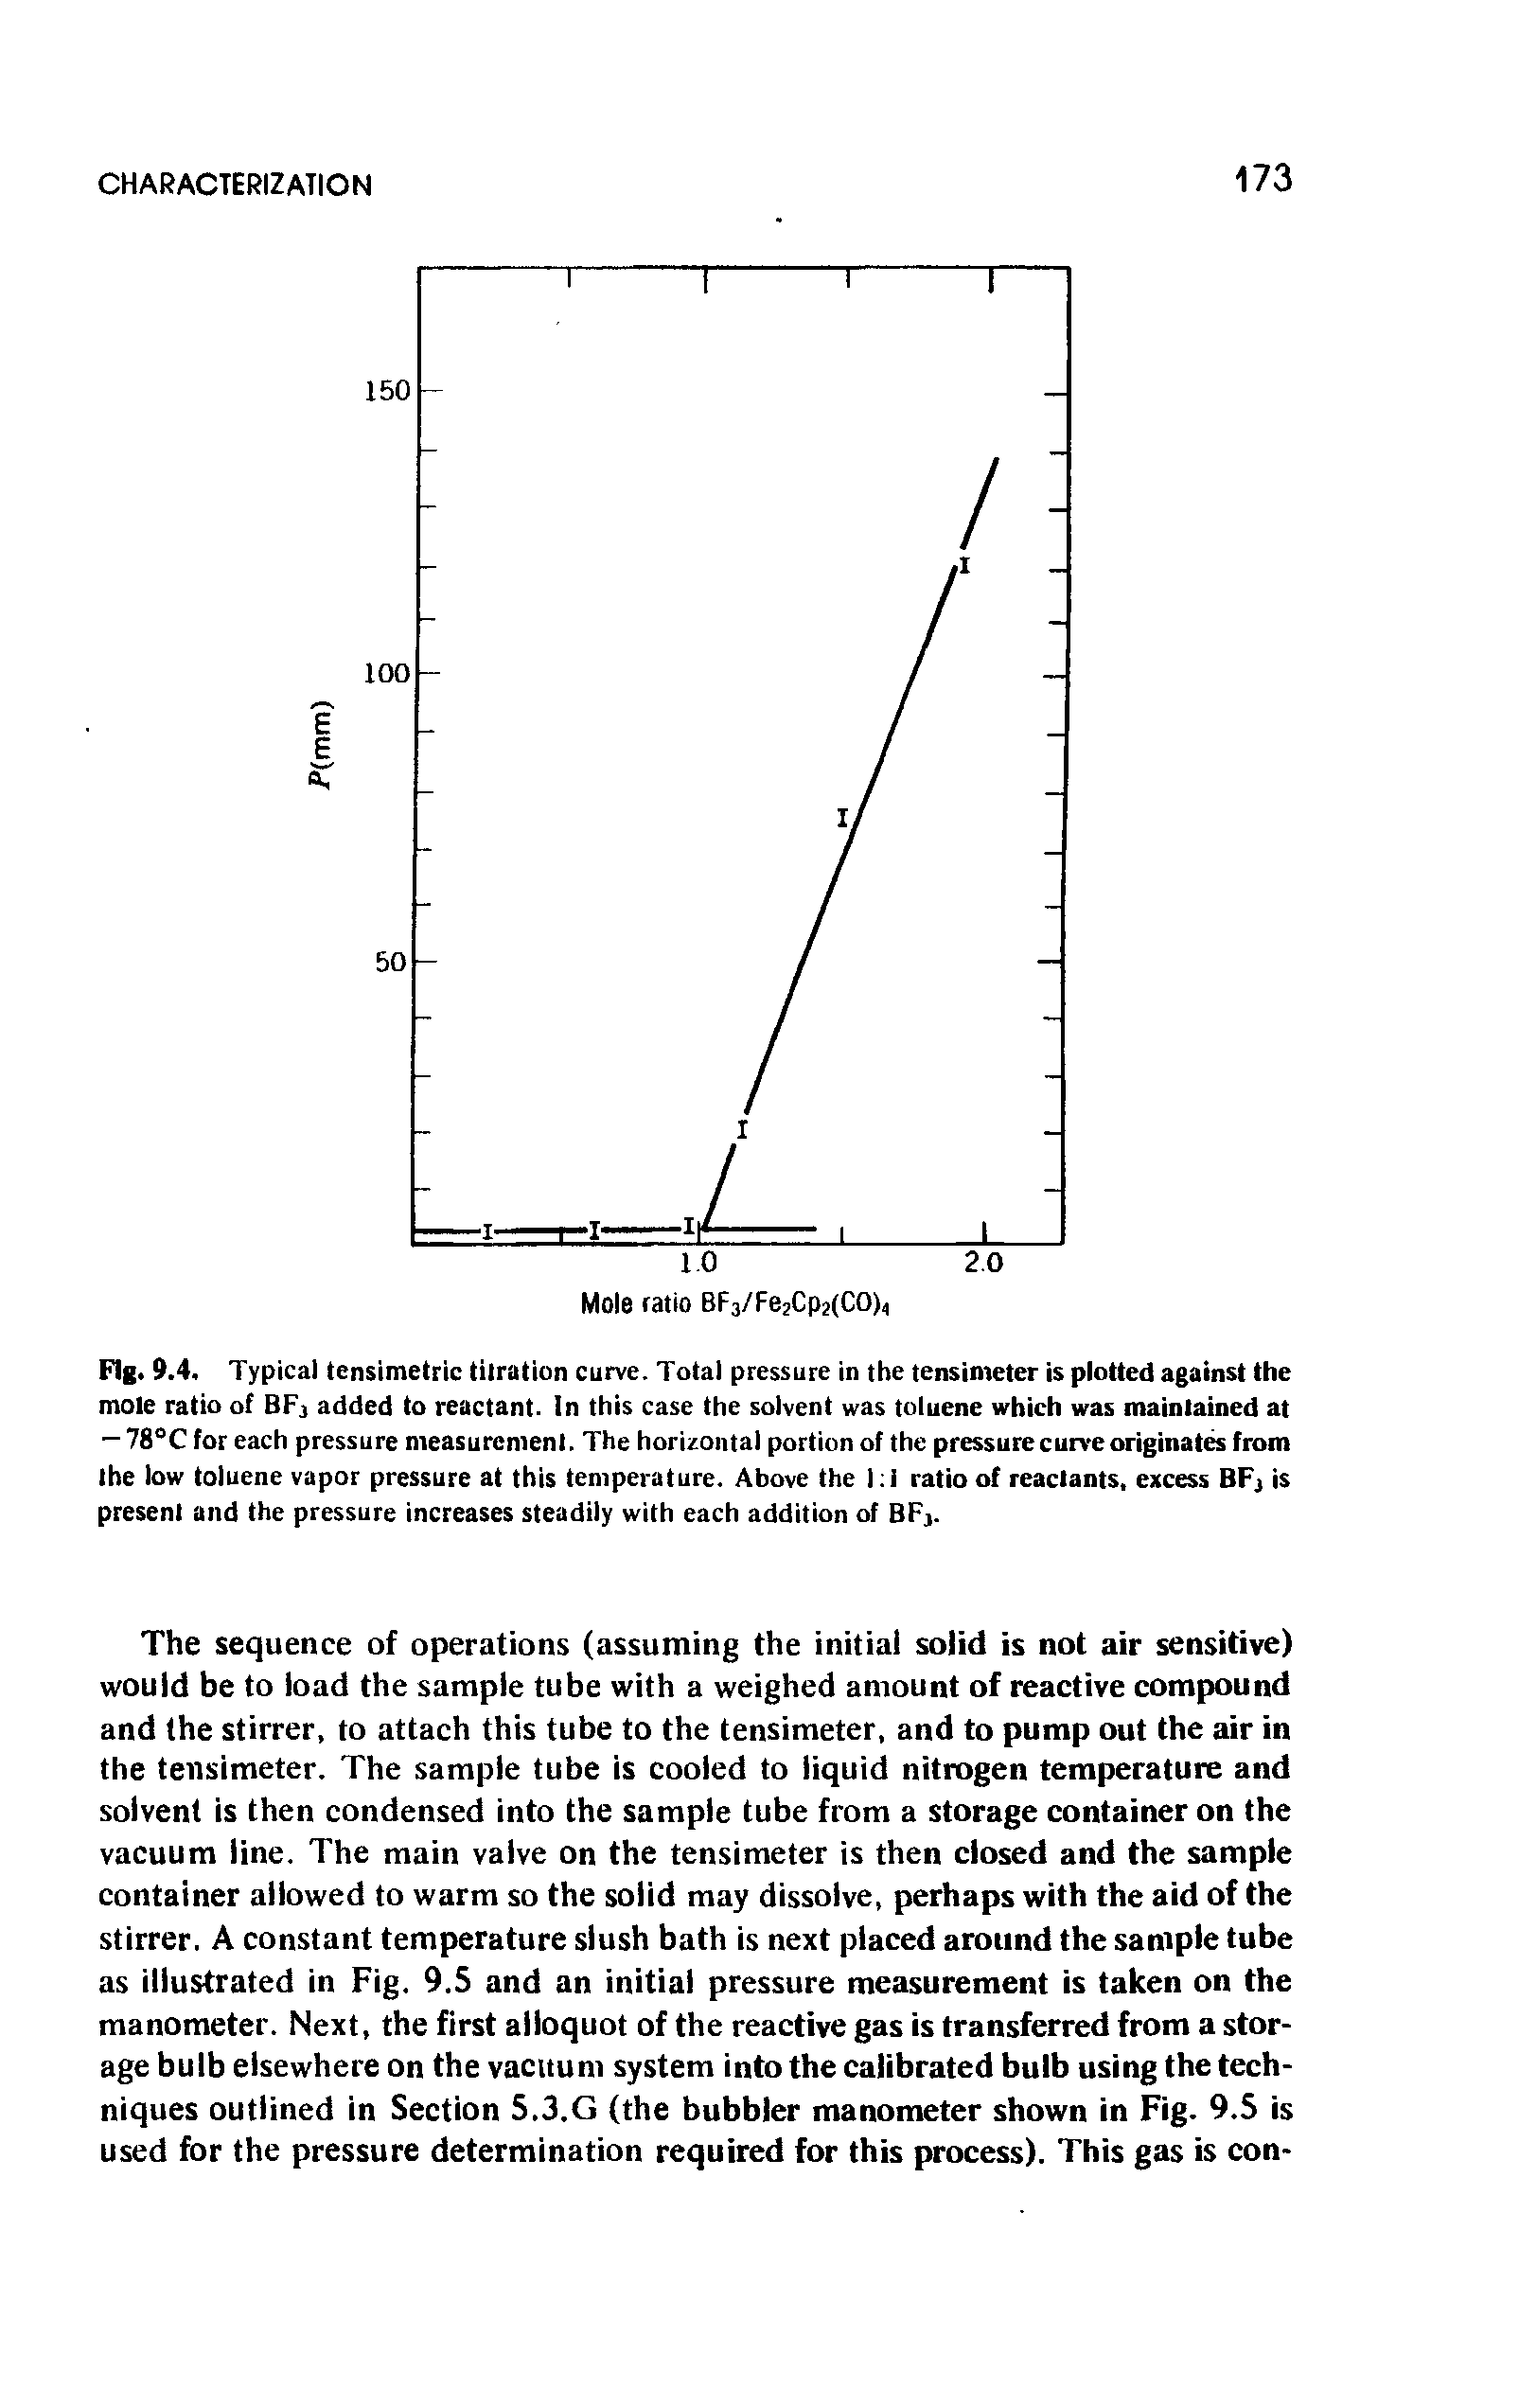 Fig. 9.4. Typical tensimetric titration curve. Total pressure in the tensimeter is plotted against the mole ratio of BFj added to reactant. In this case the solvent was toluene which was maintained at — 78°C for each pressure measurement. The horizontal portion of the pressure curve originates from the low toluene vapor pressure at this temperature. Above the I i ratio of reactants, excess BFj is present and the pressure increases steadily with each addition of BFj.